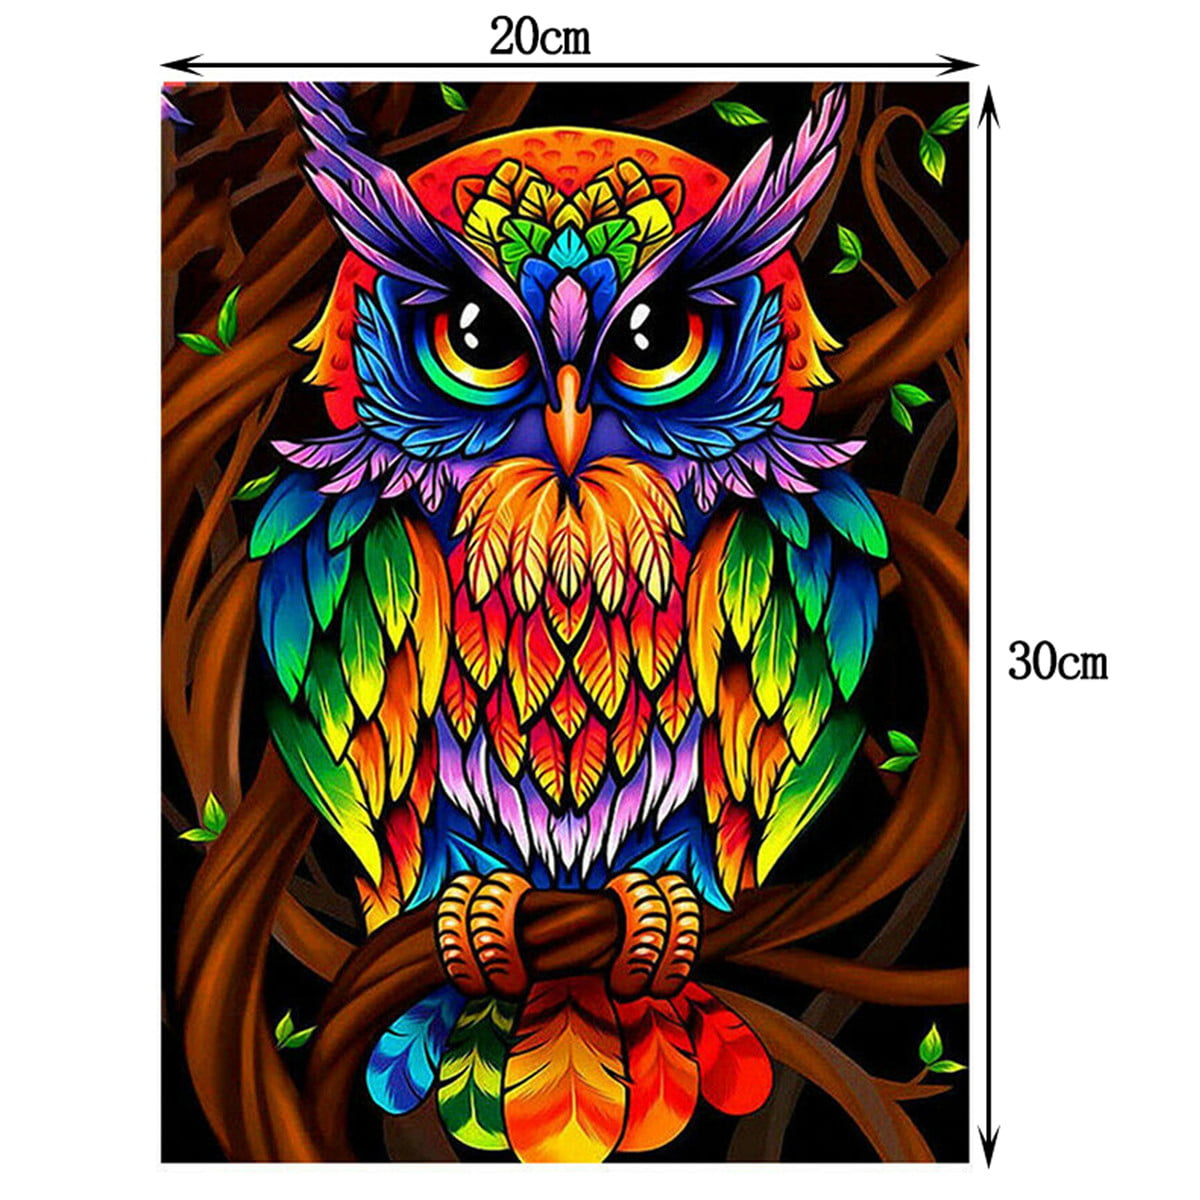  pvoodire Eagle Diamond Painting Kits for Adults-Owl Diamond  Art,5D Diamond Painting Owl for Home Wall Decor Gifts(12x16inch)